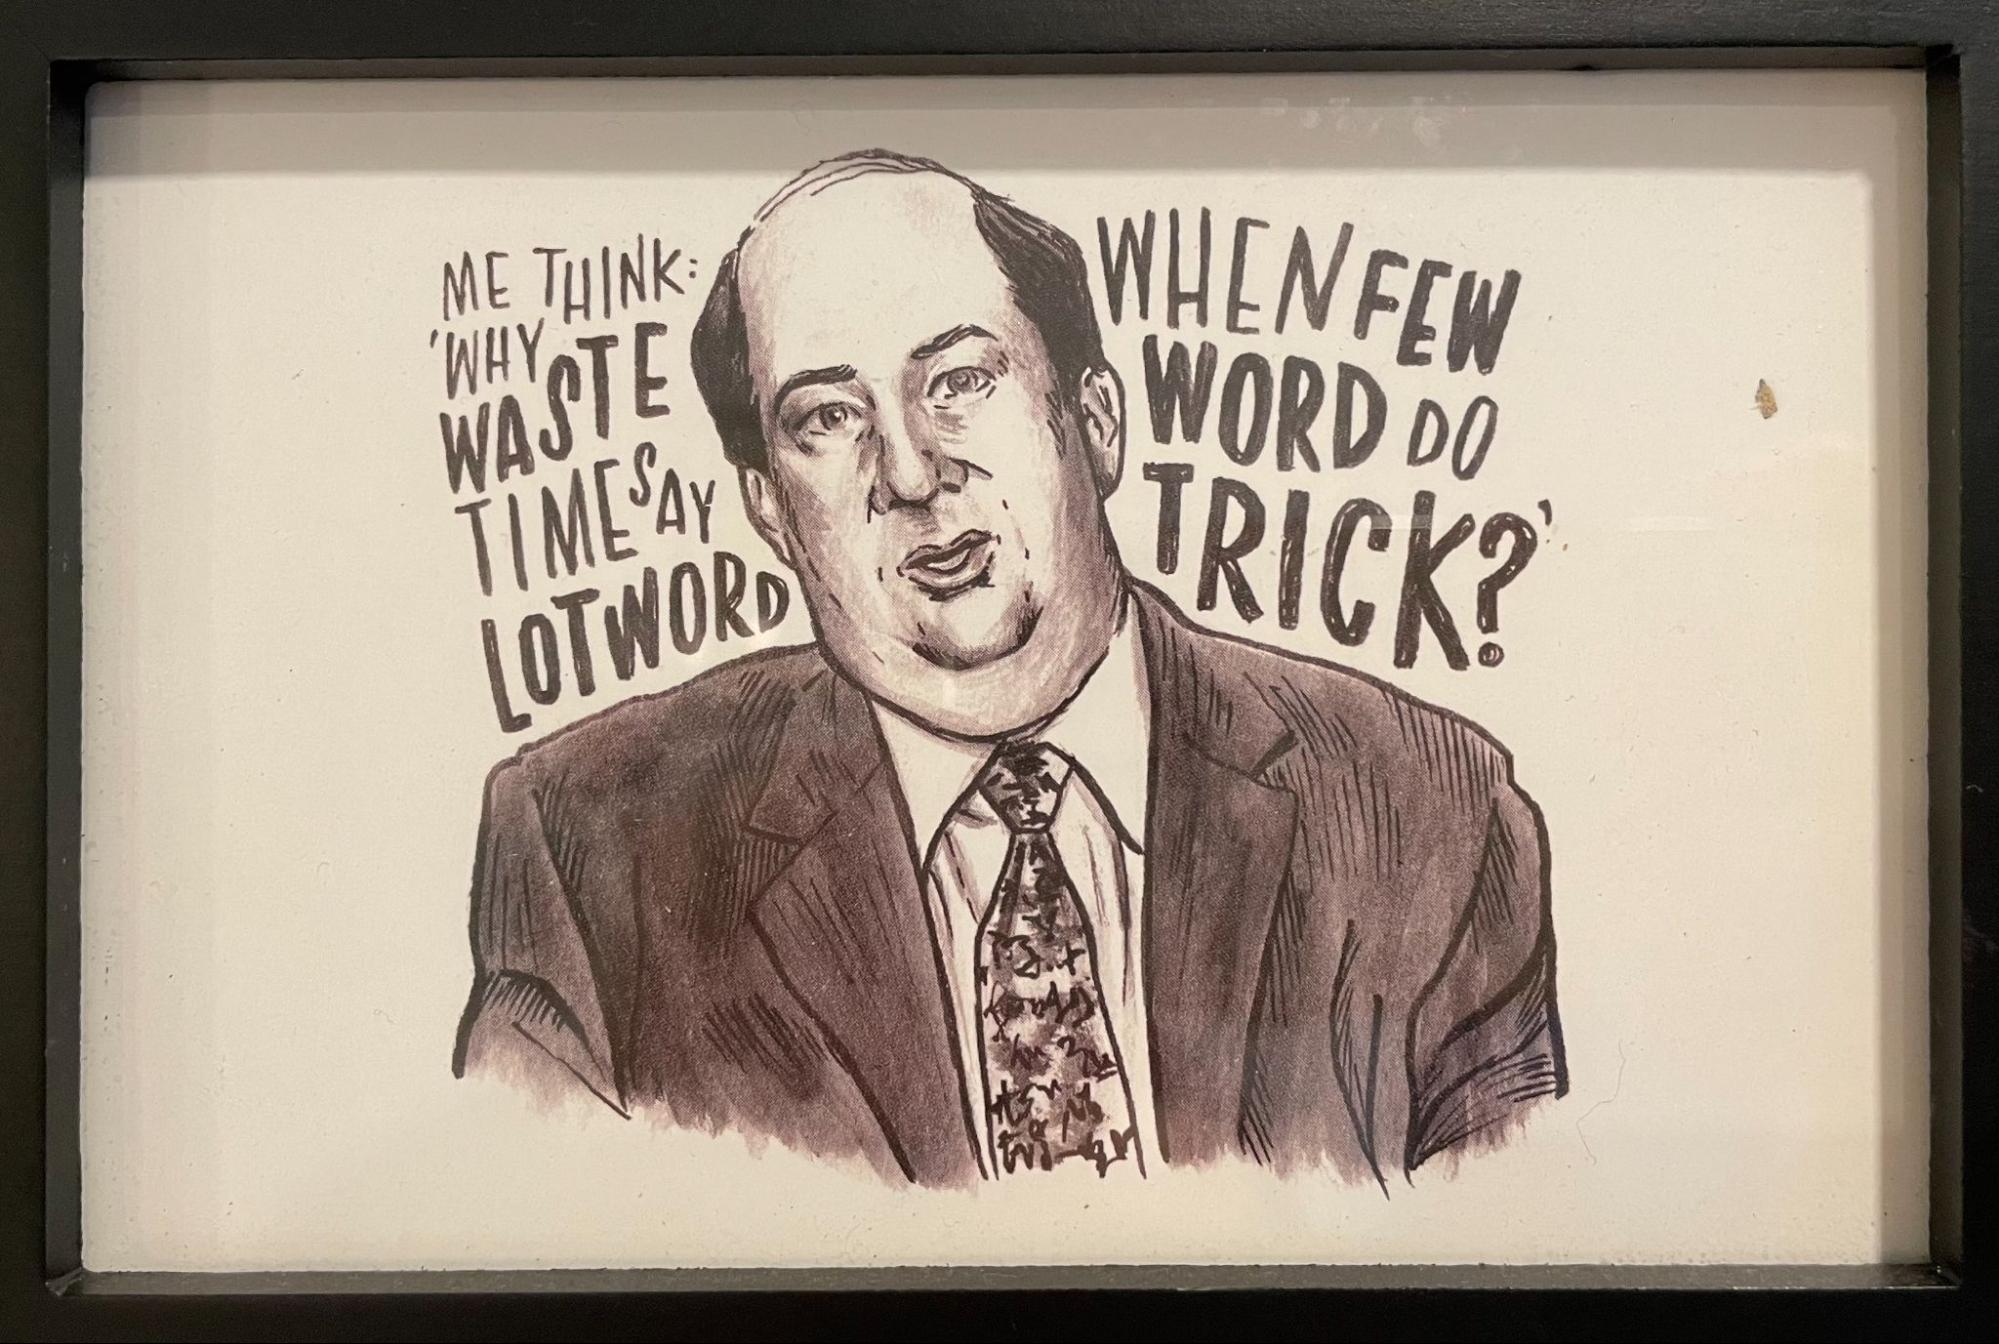 Kevin from The Office